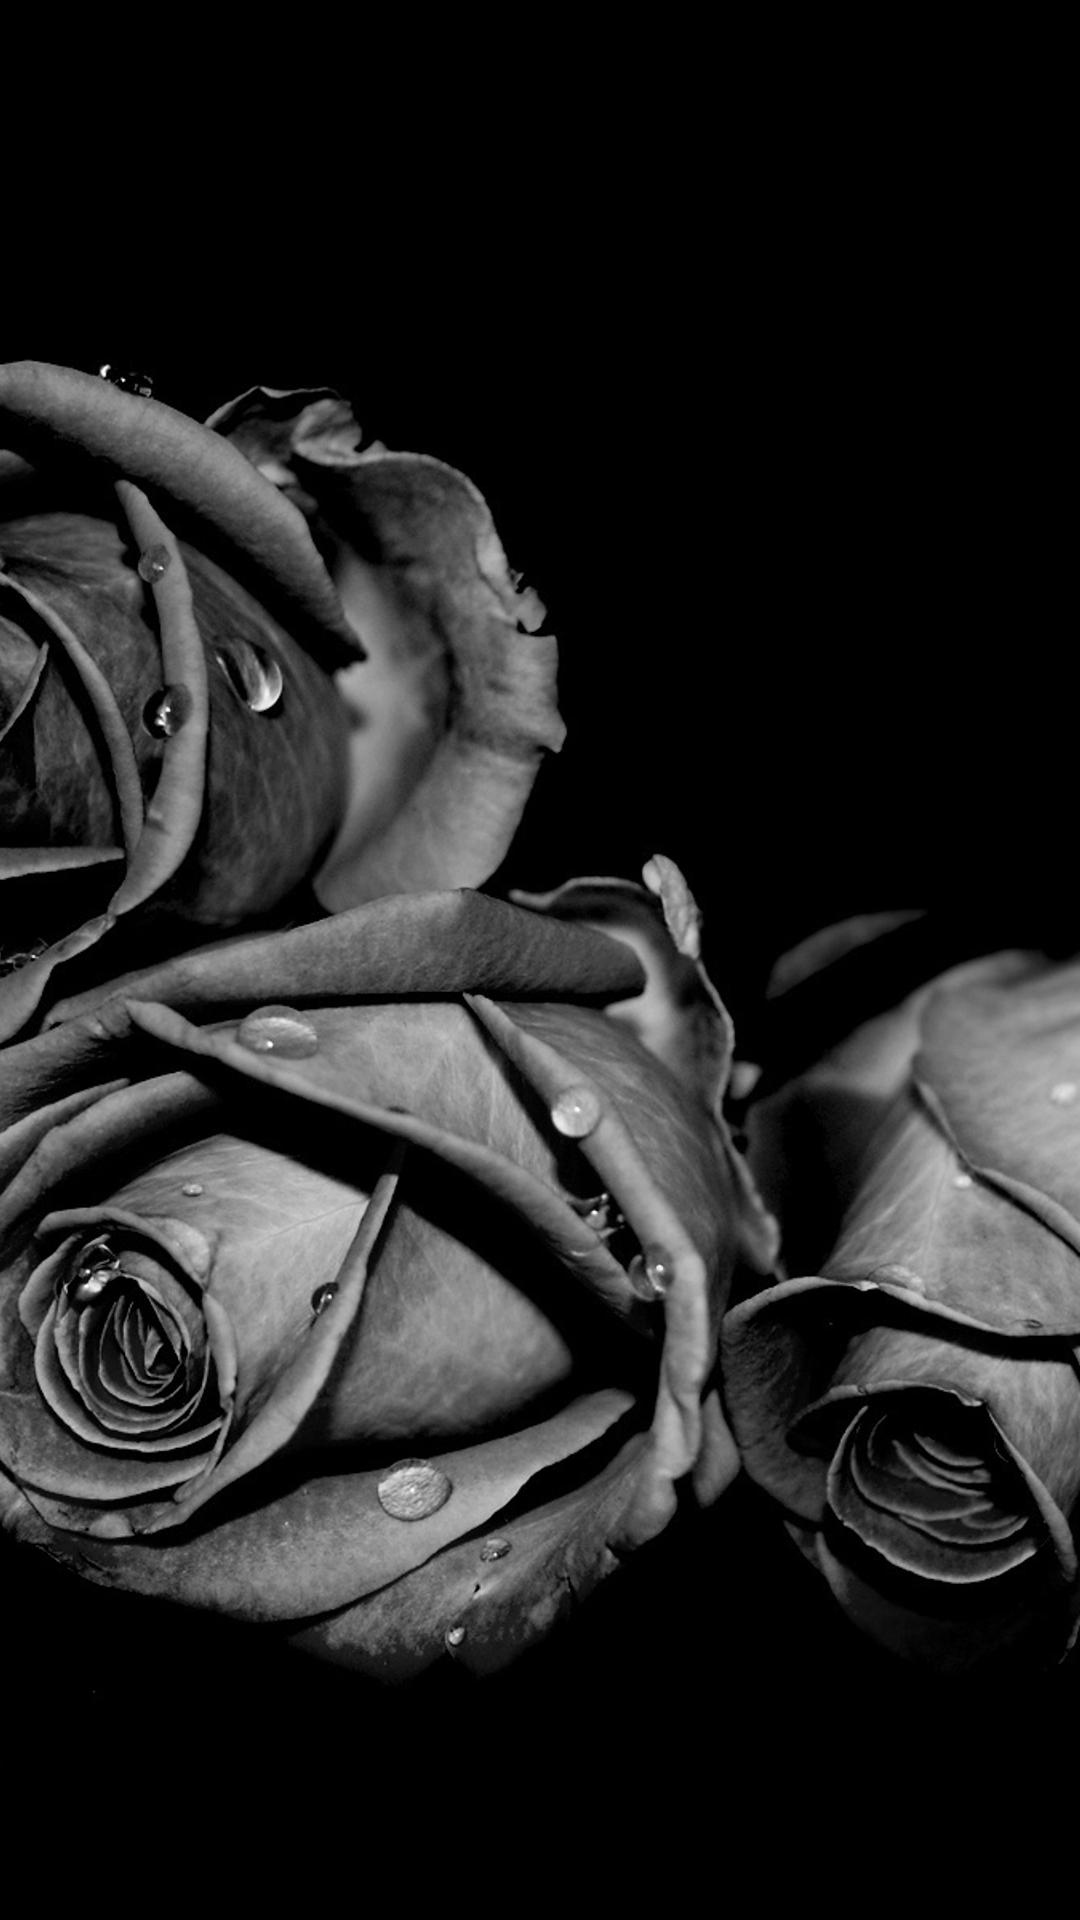 A black and white photo of three roses - Black rose